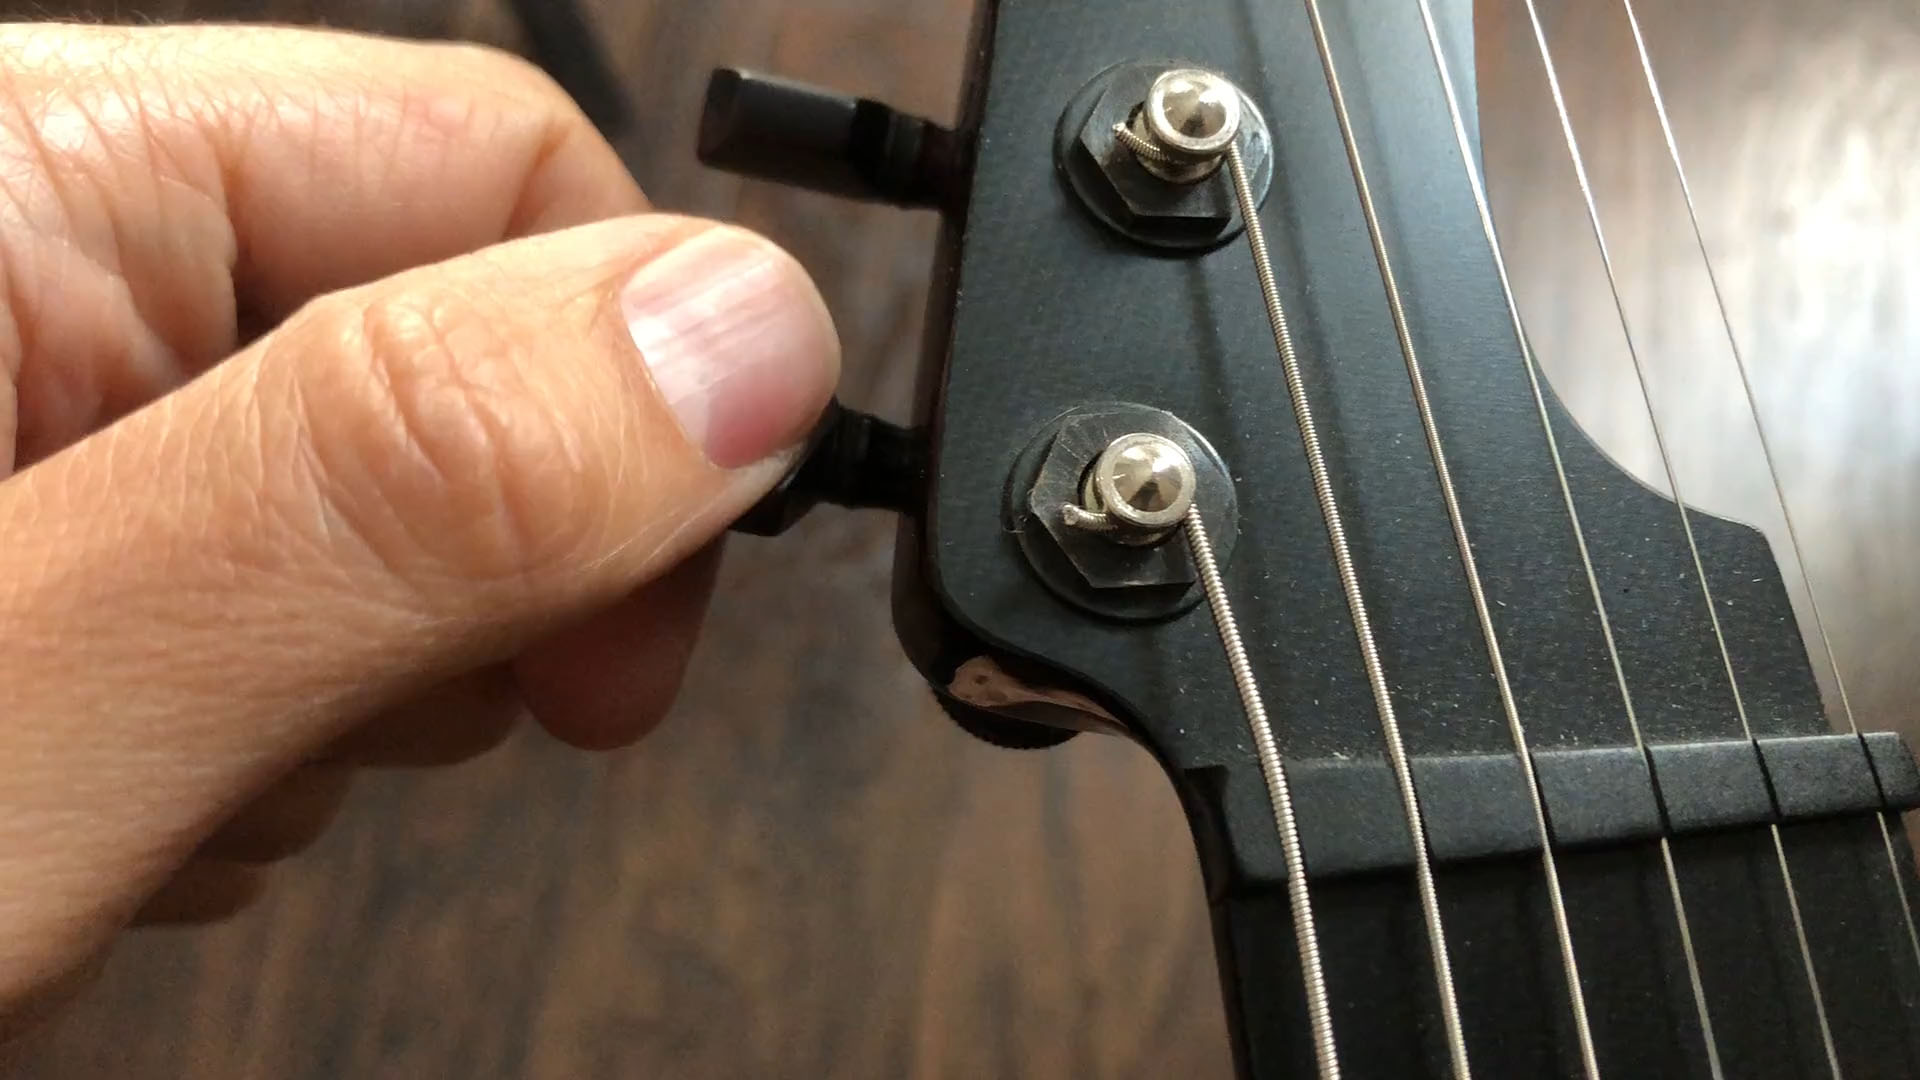 How to replace \\ with \ in strings? - #40 by Gooncreeper